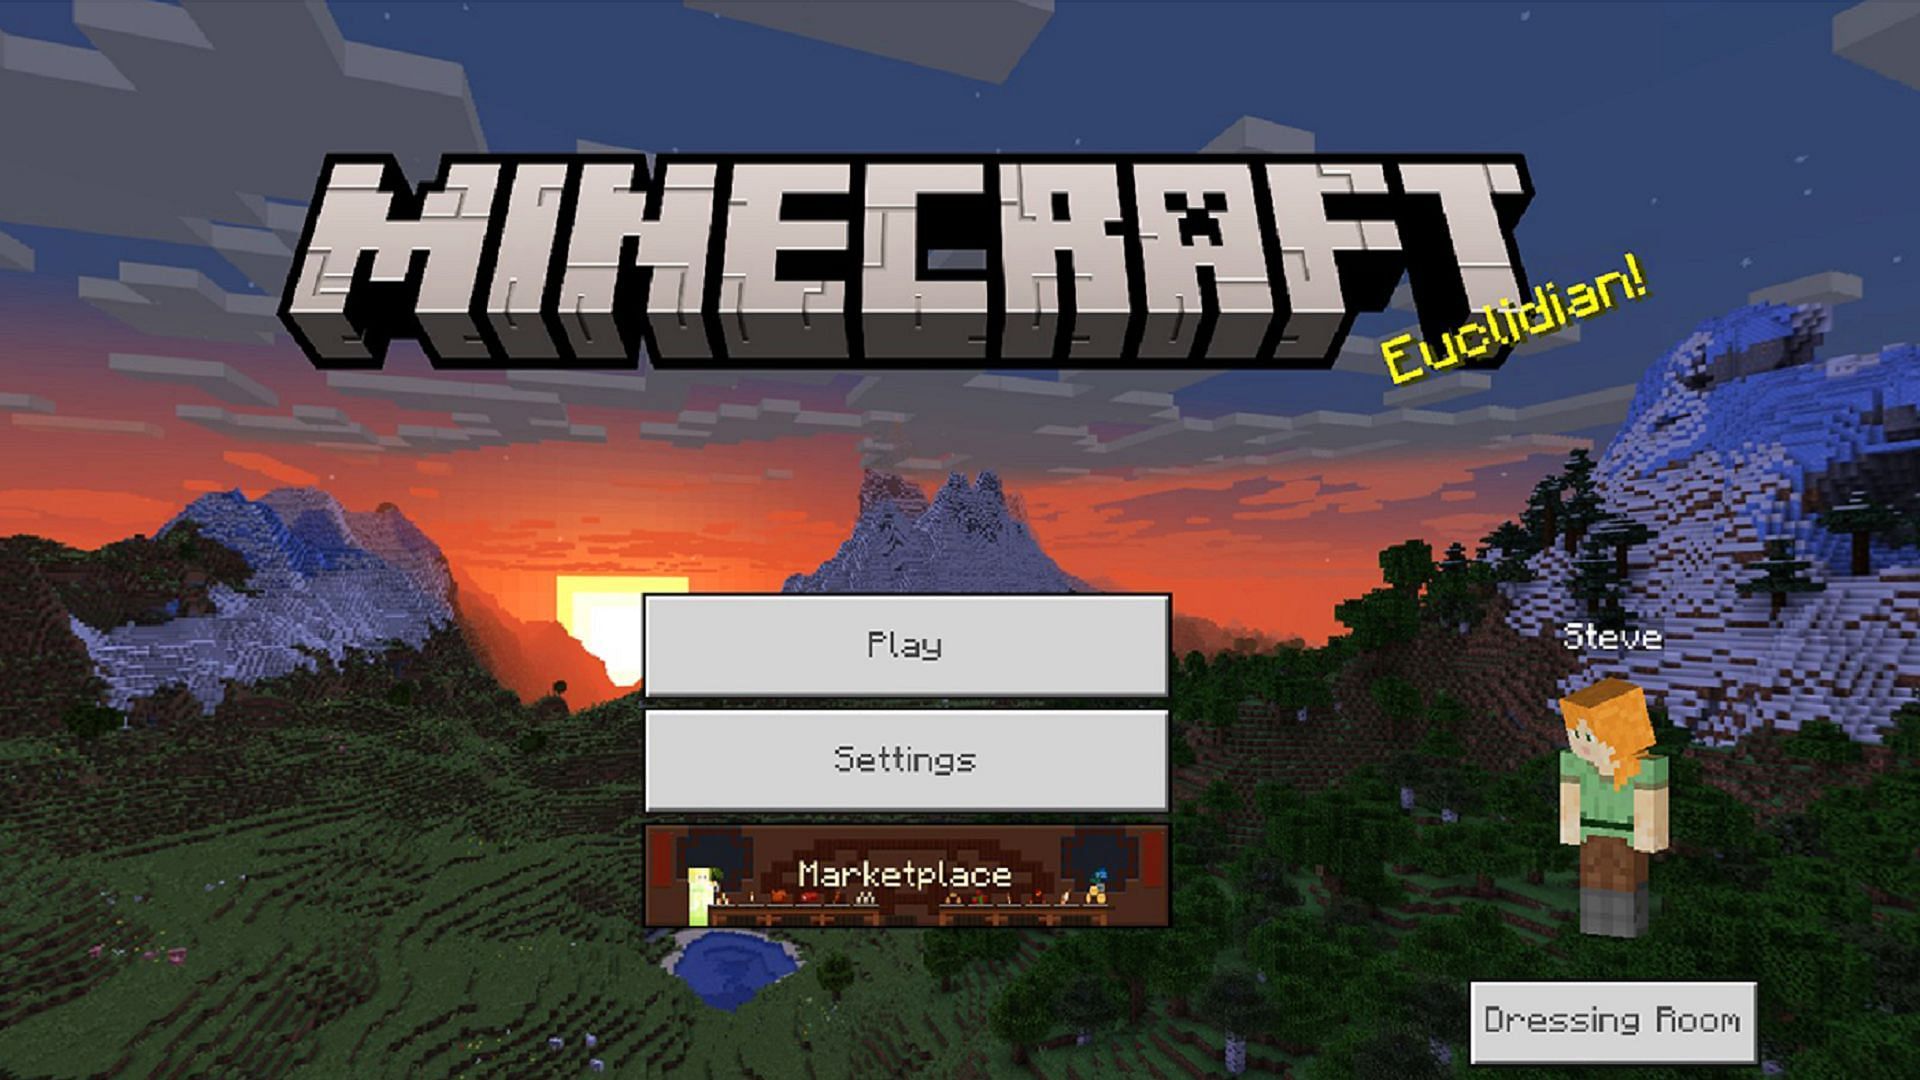 The Marketplace can be accessed on the main menu of Bedrock Edition (Image via Mojang)